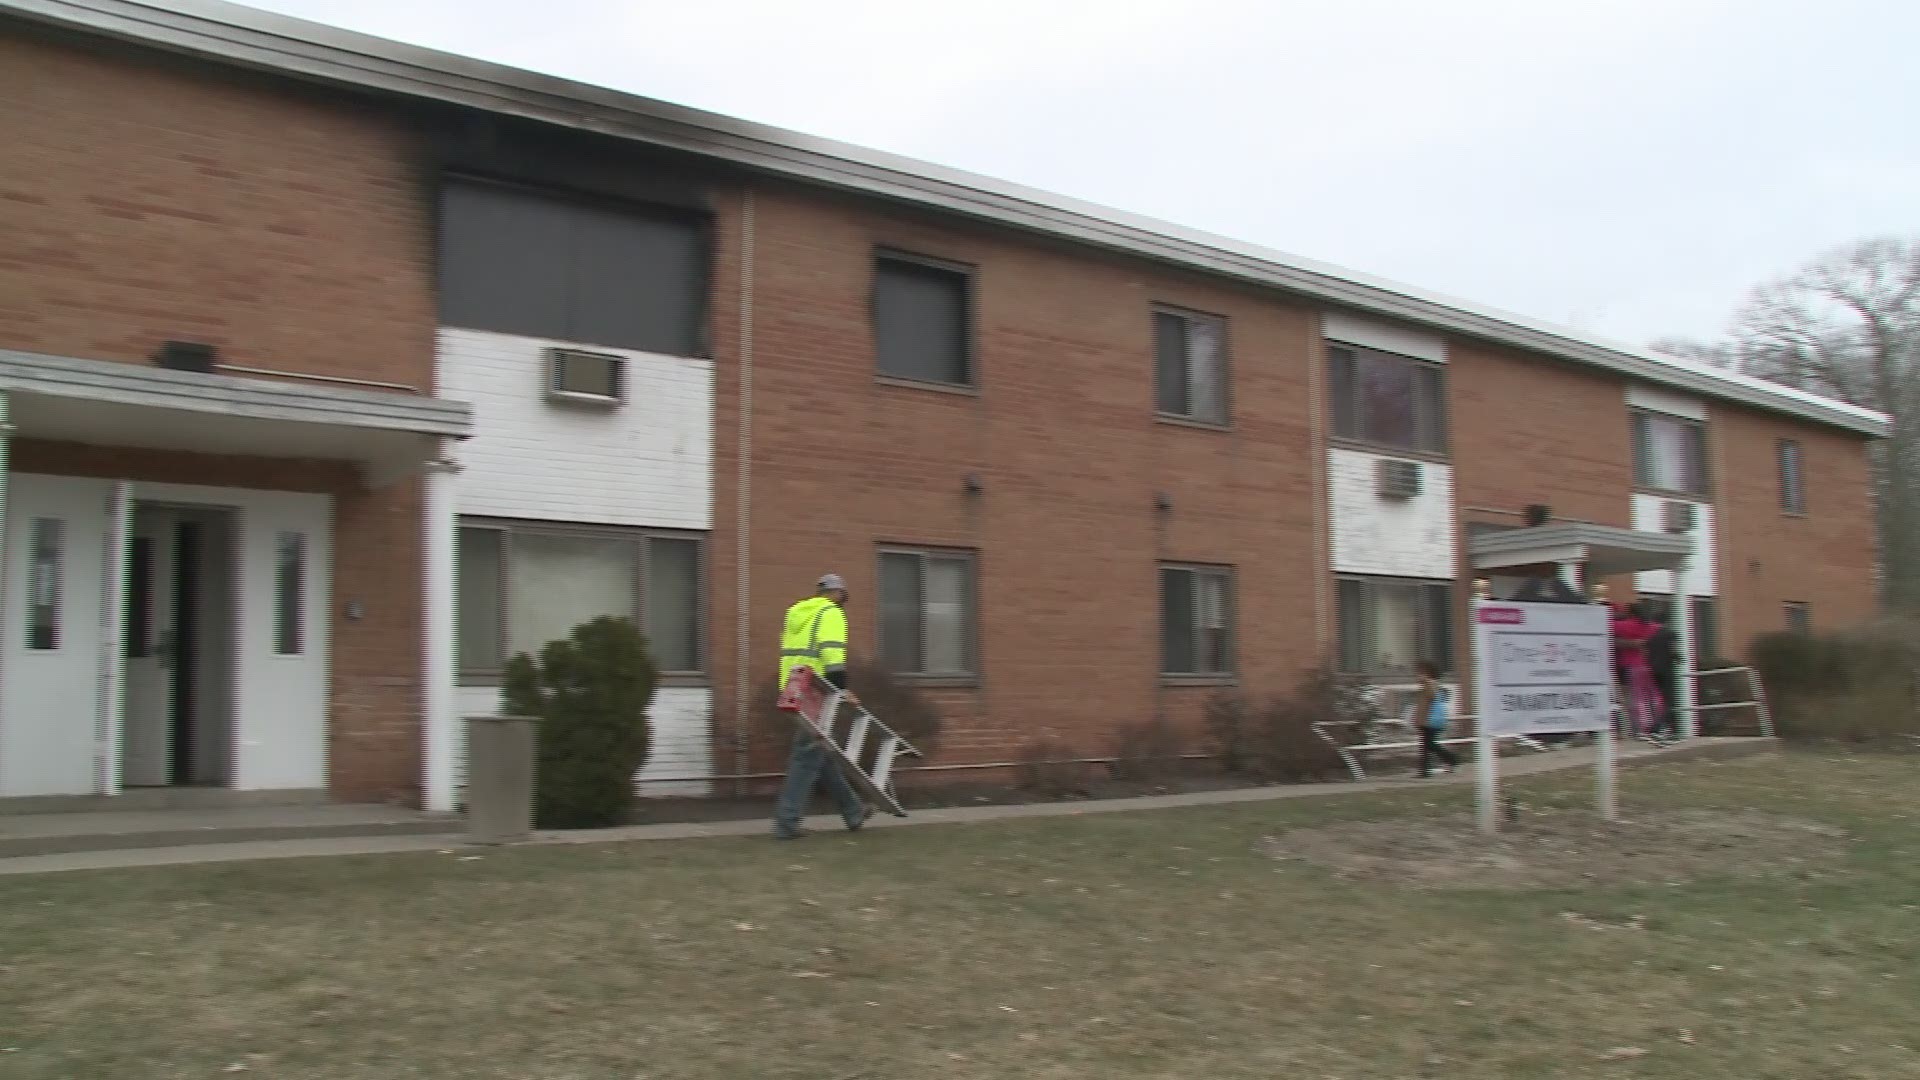 A three-year-old girl was killed in an apartment fire on Sunday. No one else was injured.